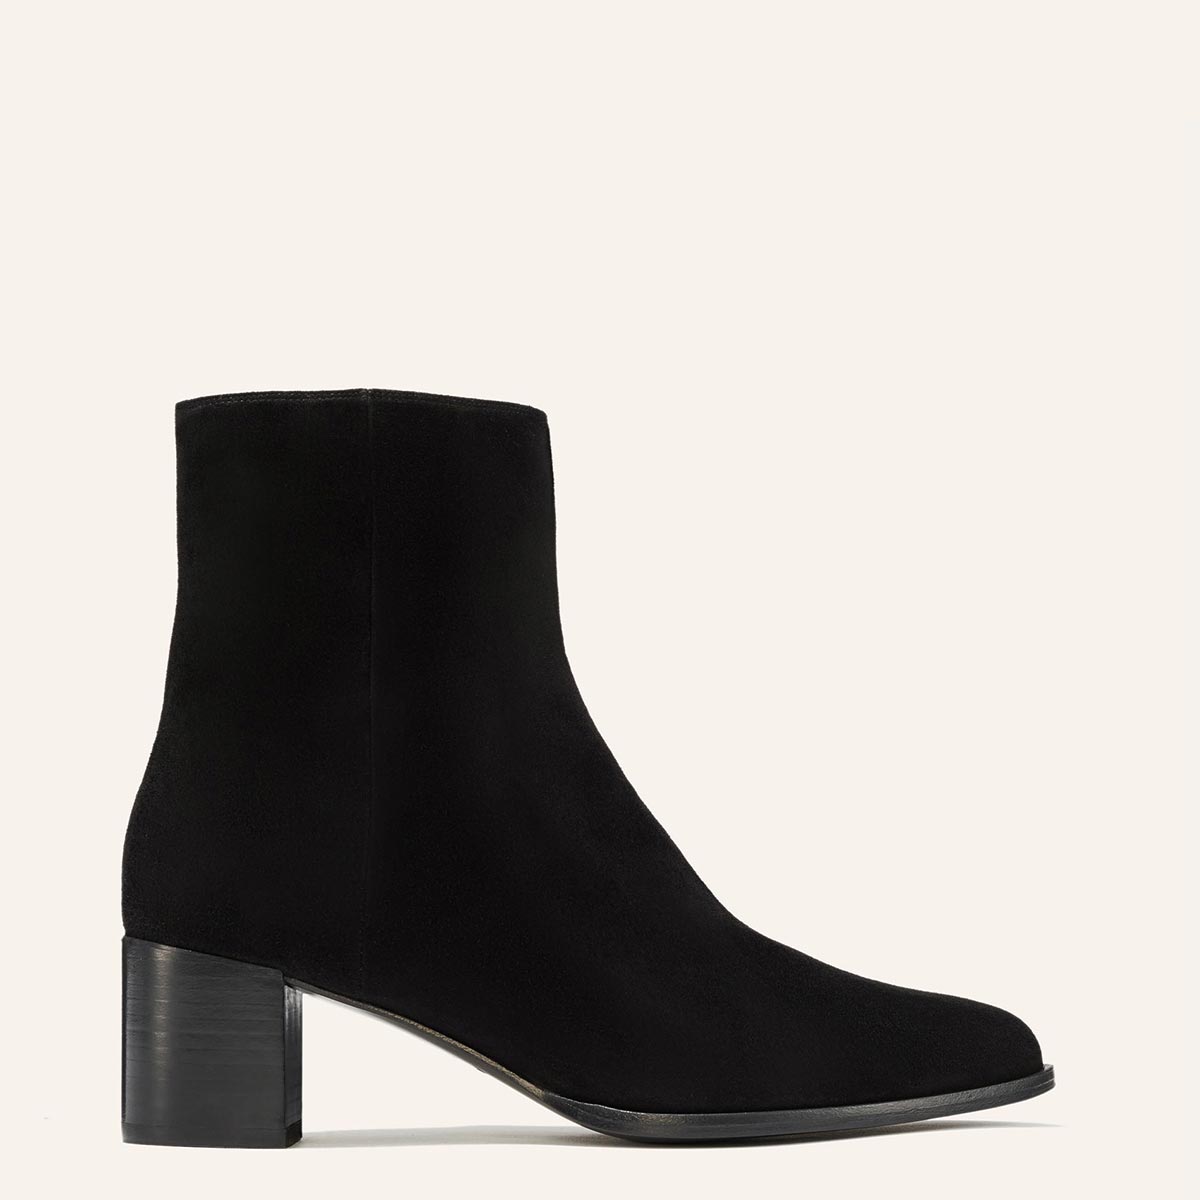 Margaux's classic Downtown Boot in black suede with a comfortable block heel and pointed toe